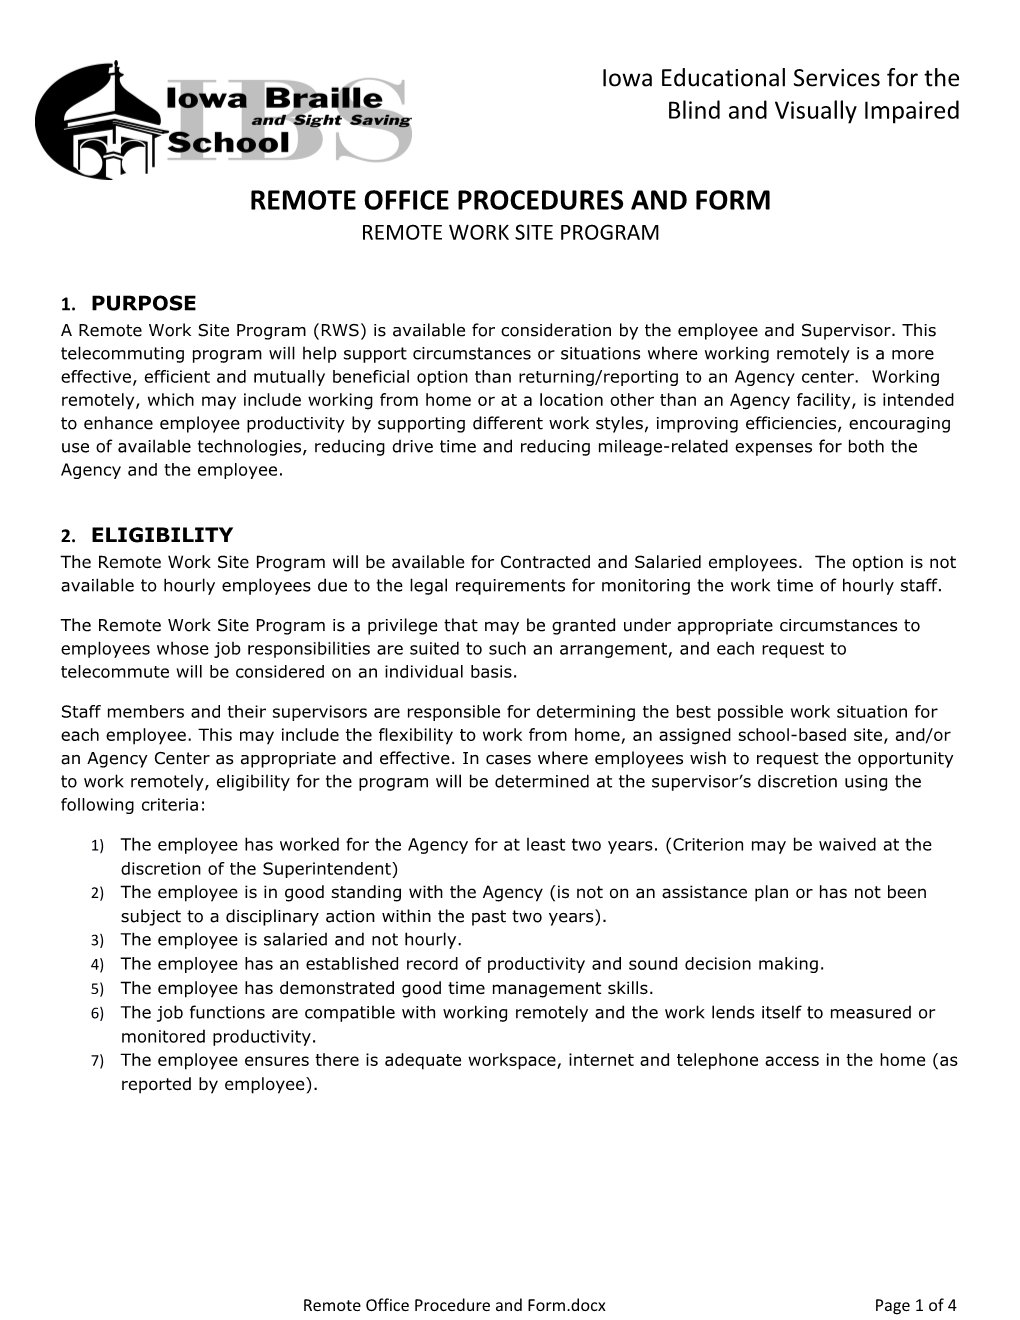 Remote Office Procedures and Form